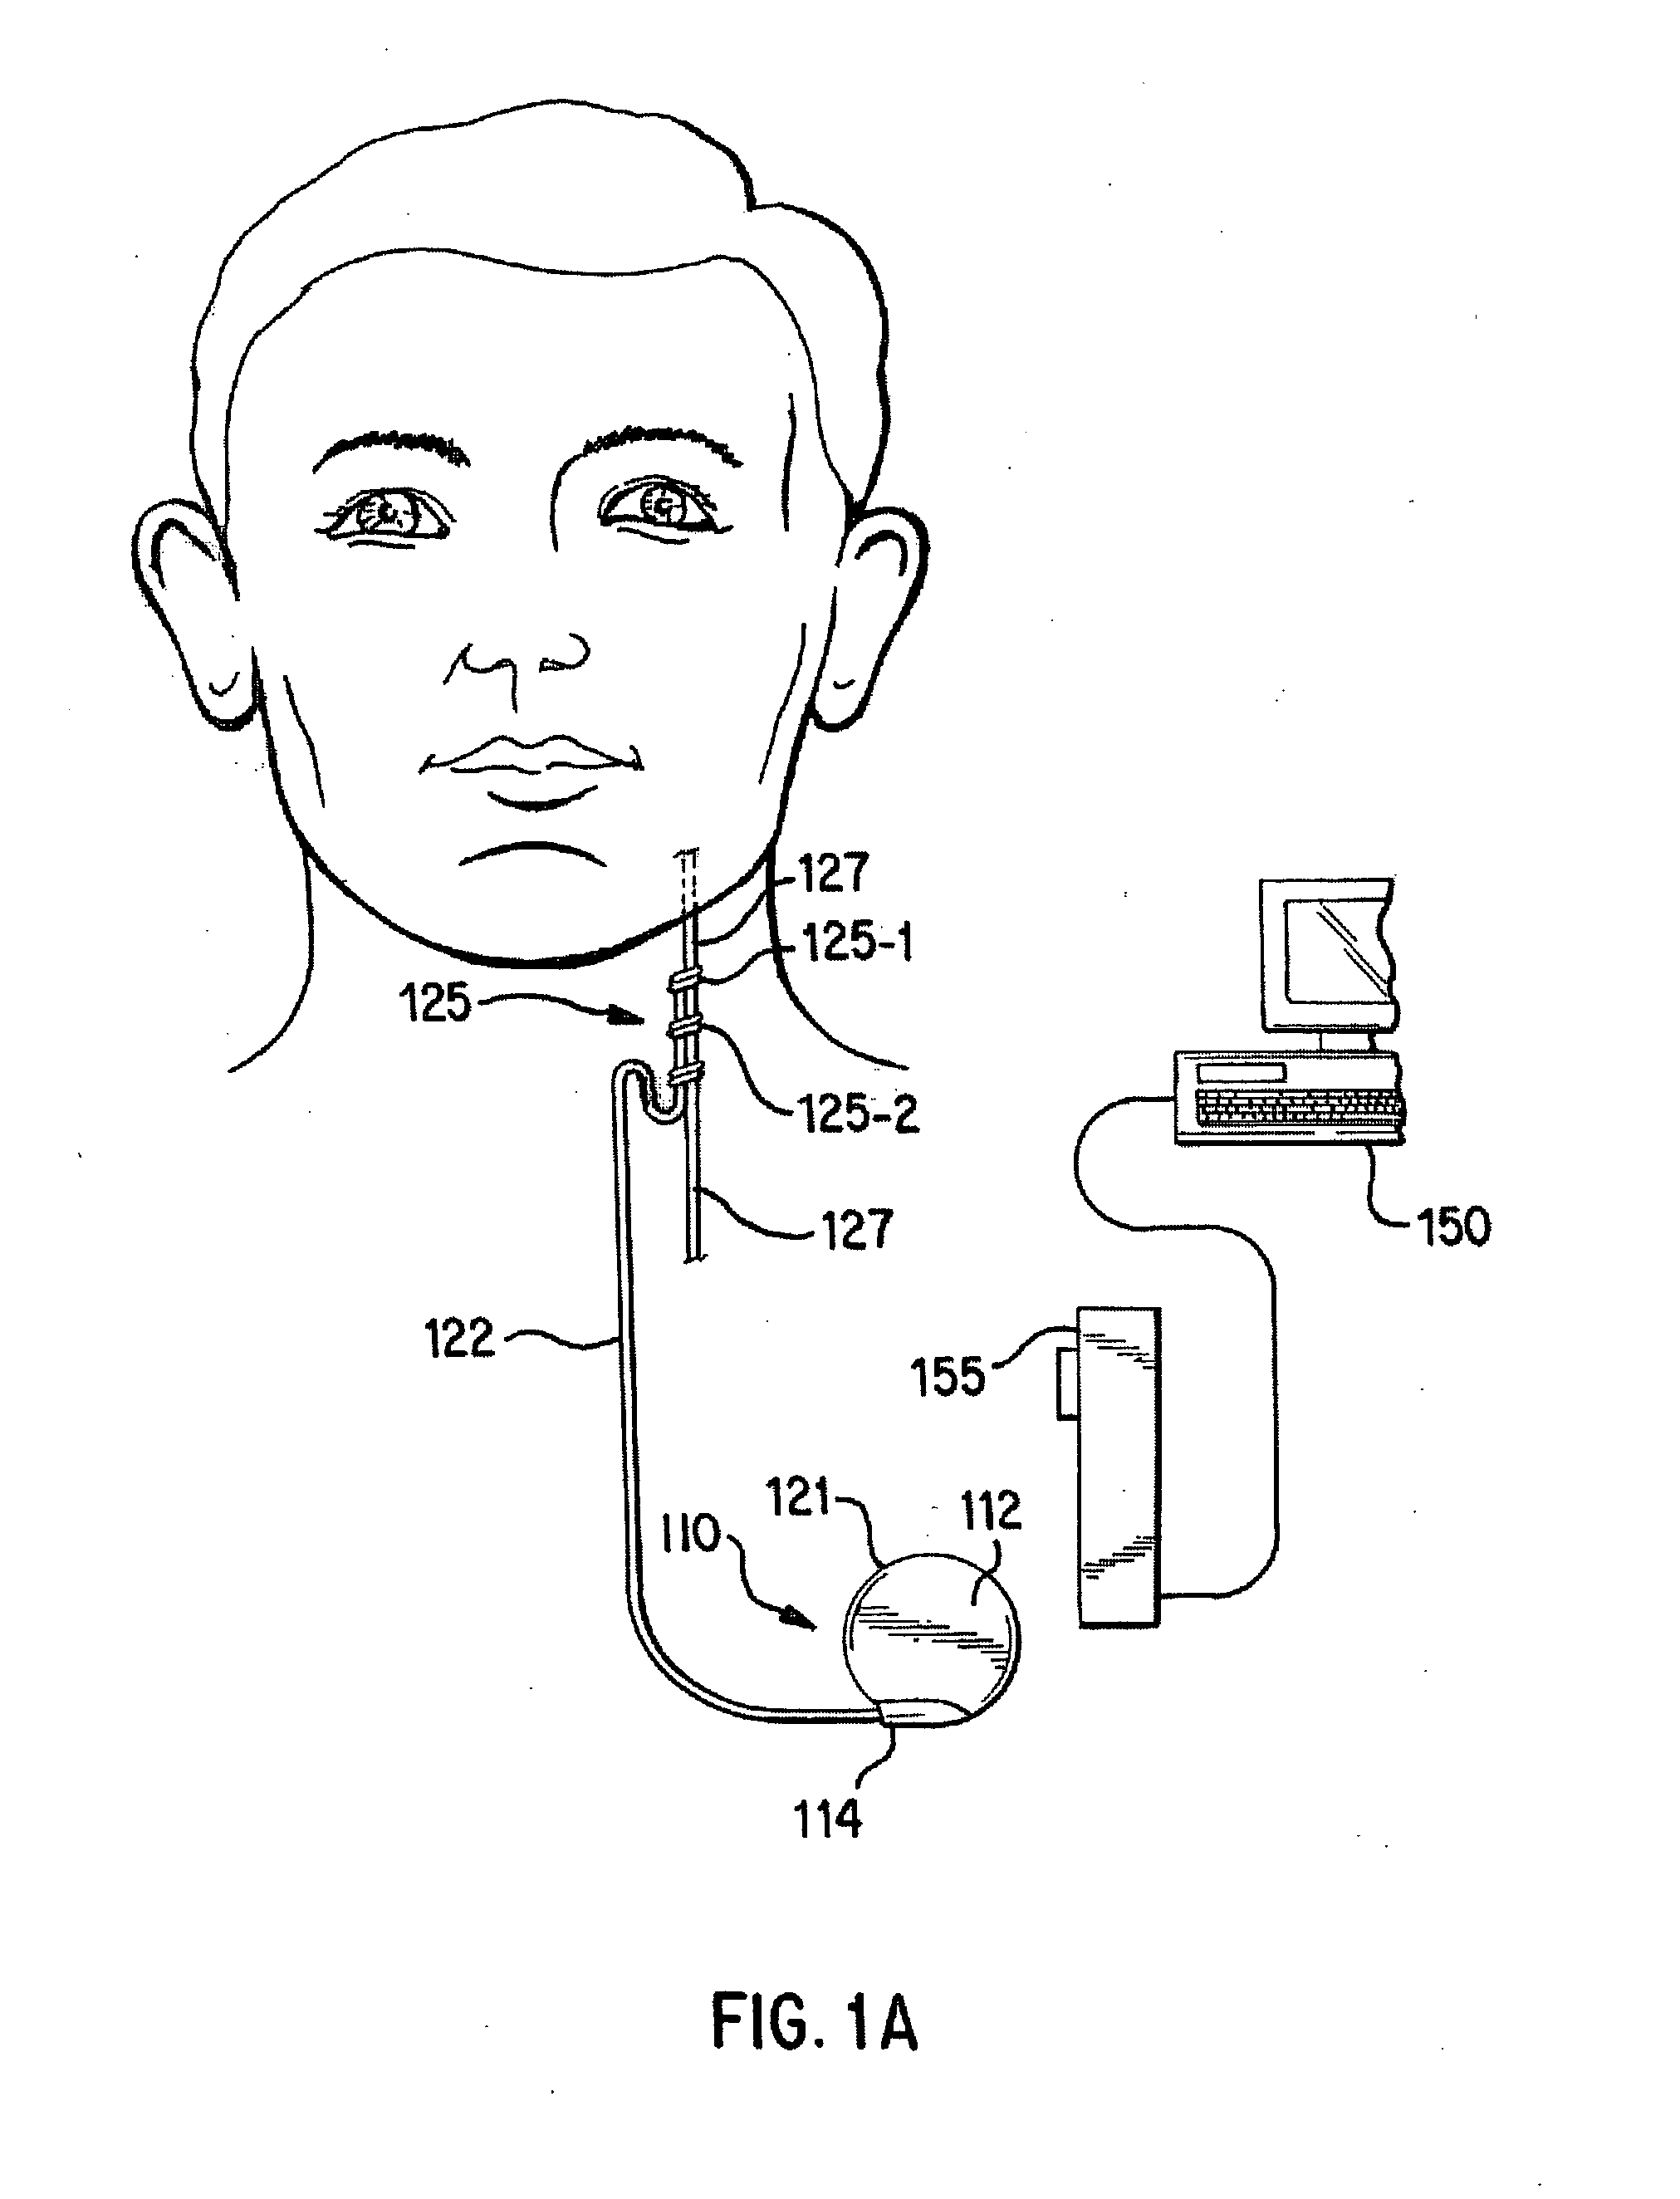 Impedance measurement for an implantable device